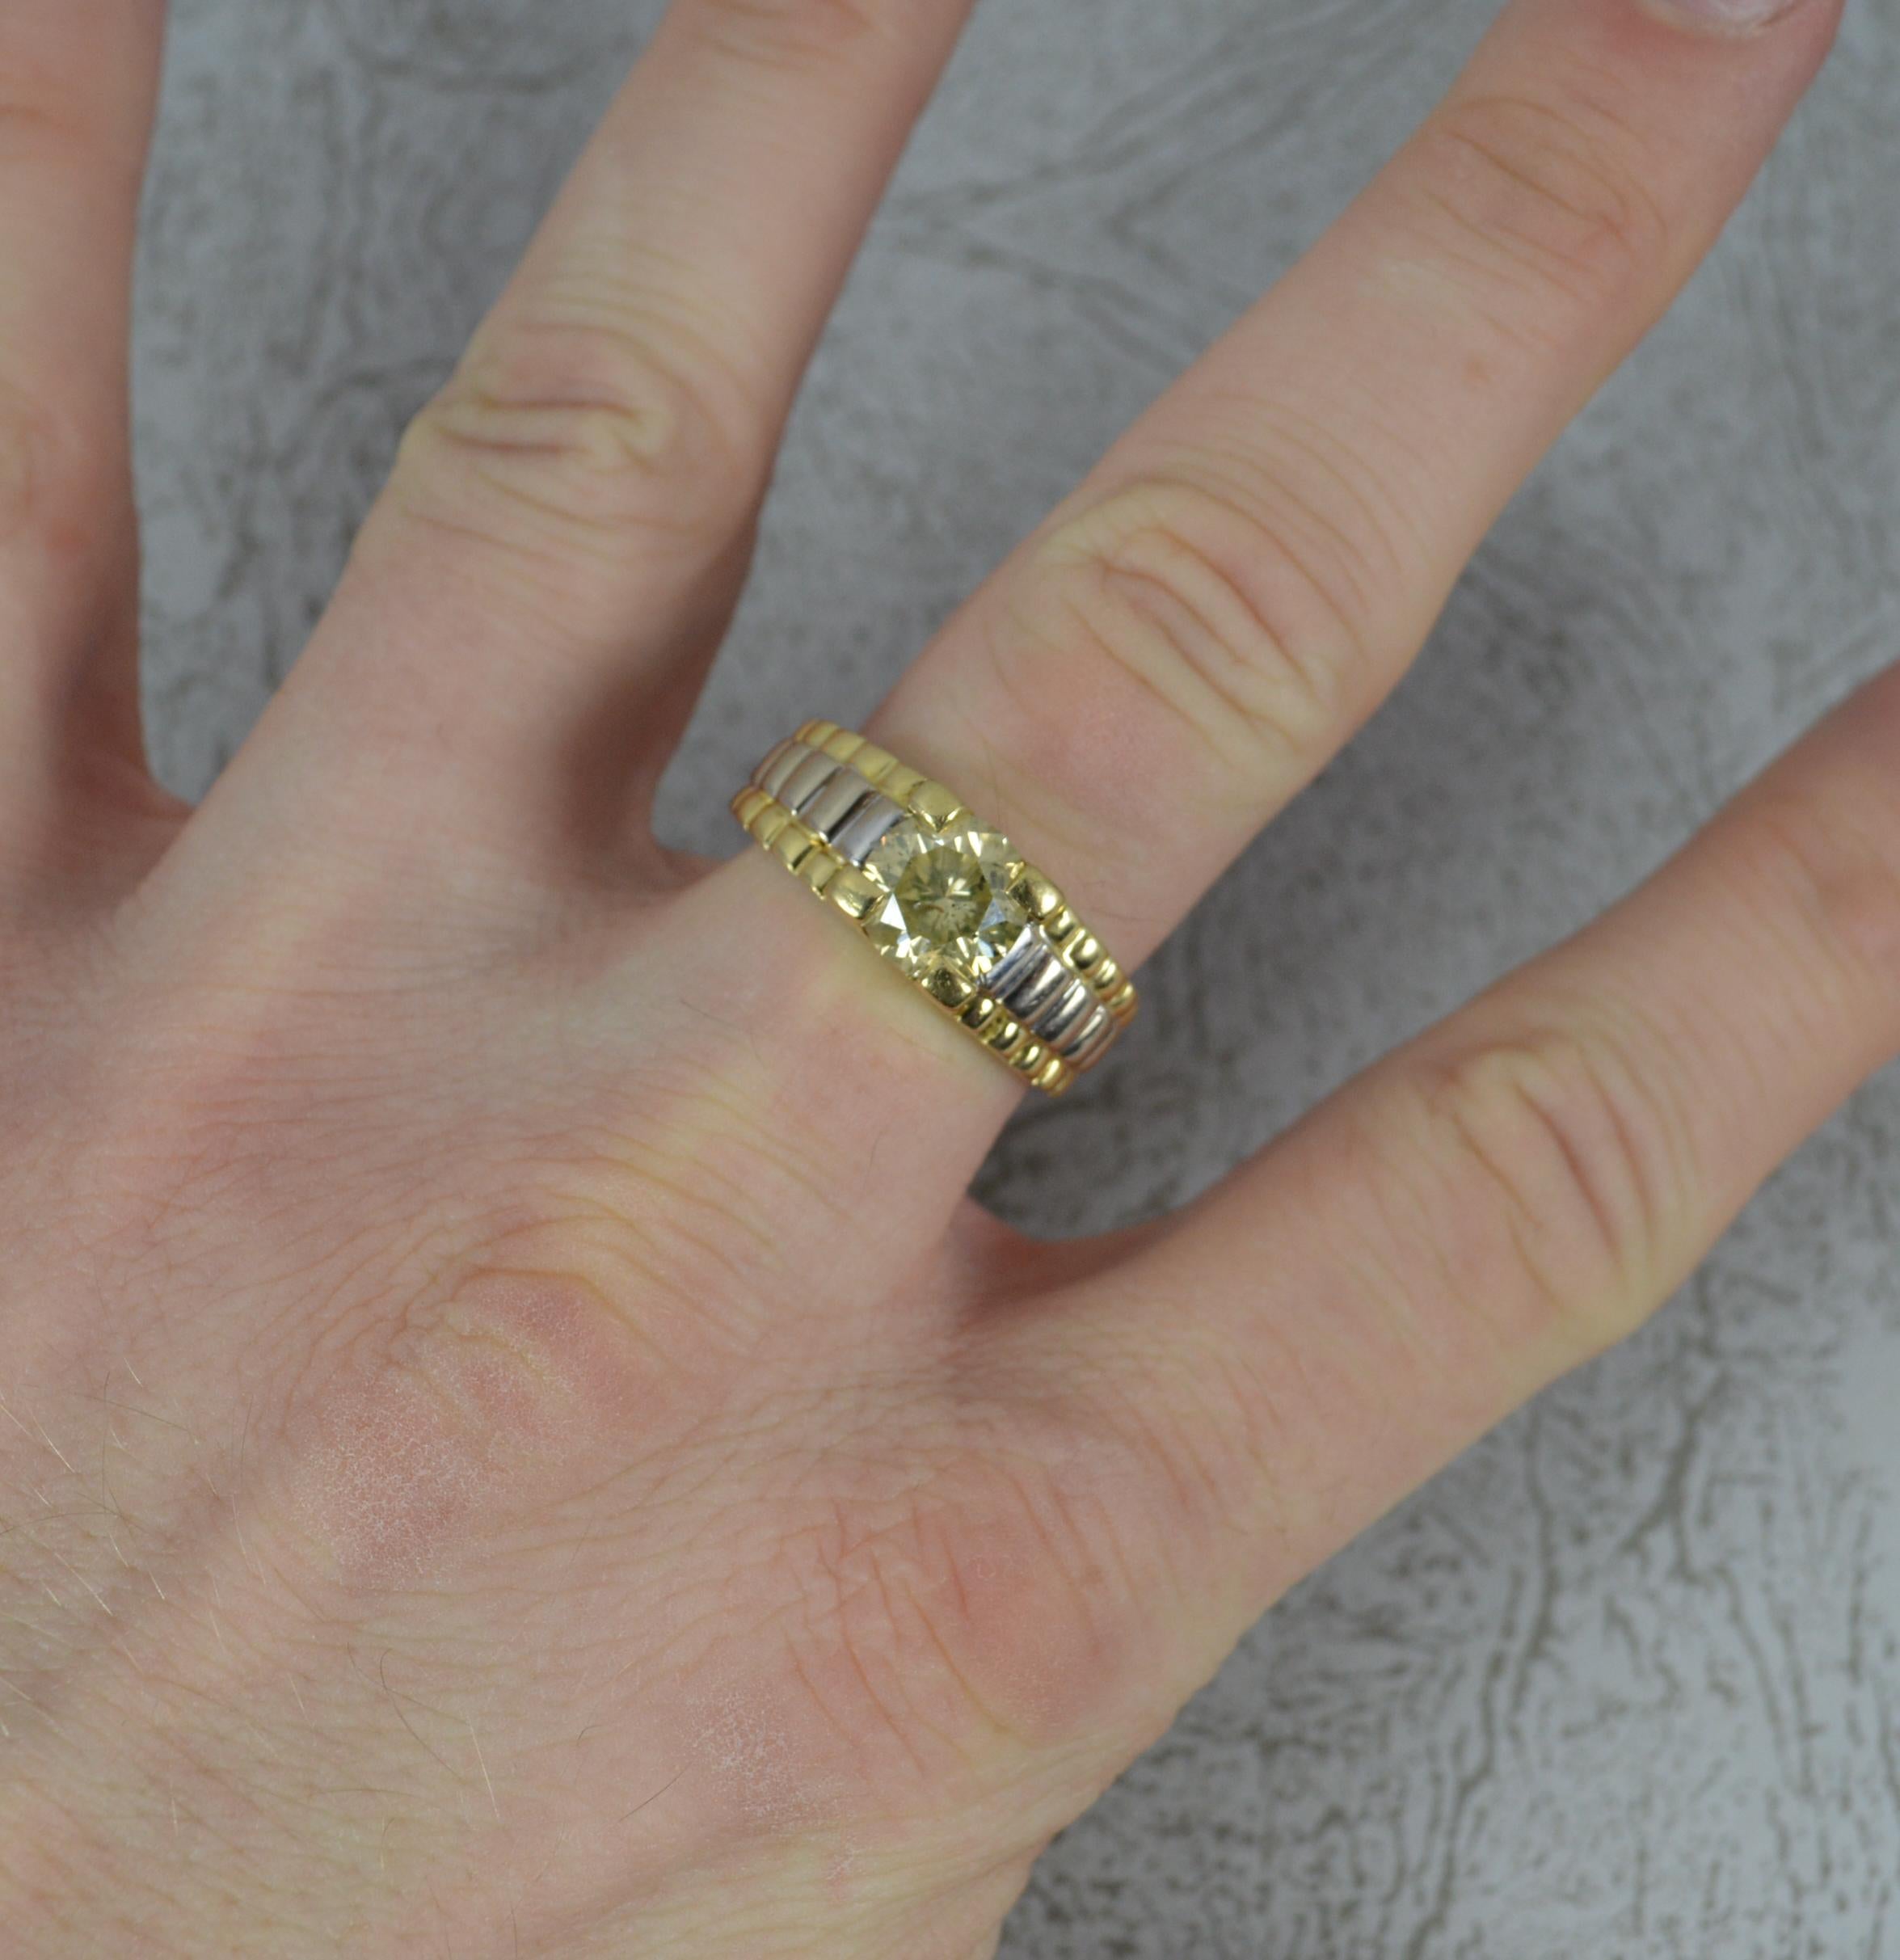 A superb 18ct gold and diamond ring.
Designed with a single natural, round brilliant cut diamond. 7.9mm diameter. 2 carats. Obvious natural, champagne colour.
Solid 18 carat yellow gold shank with white gold highlight. Based on the Rolex